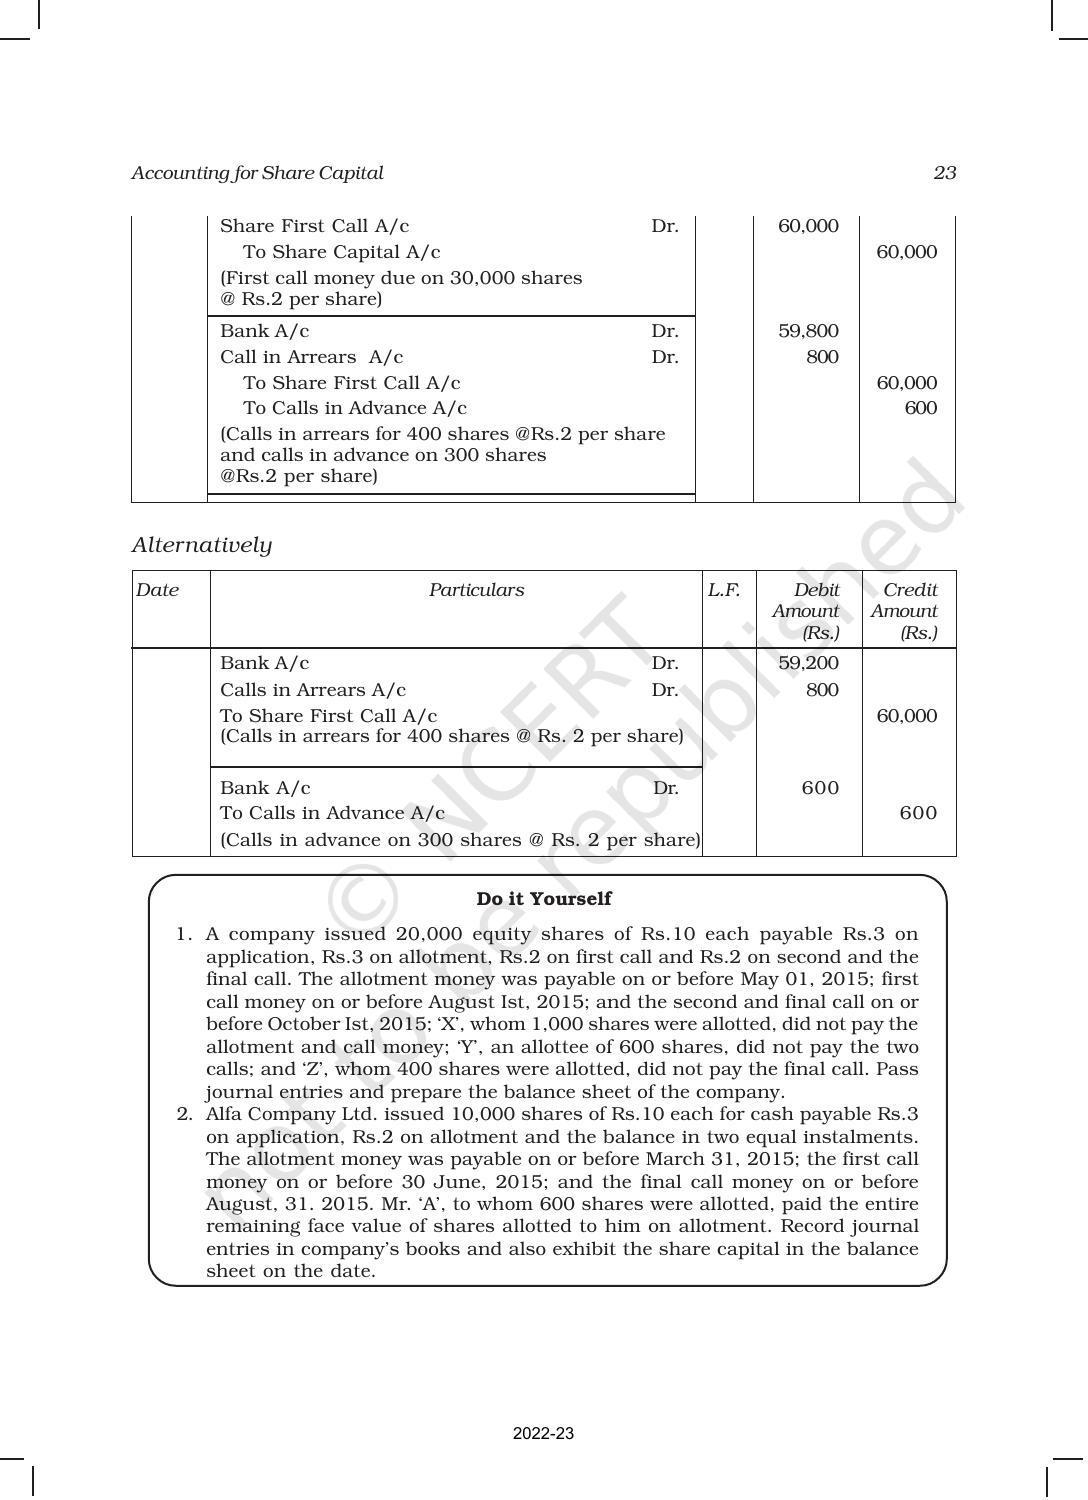 NCERT Book for Class 12 Accountancy Part II Chapter 1 Accounting for Share Capital - Page 23